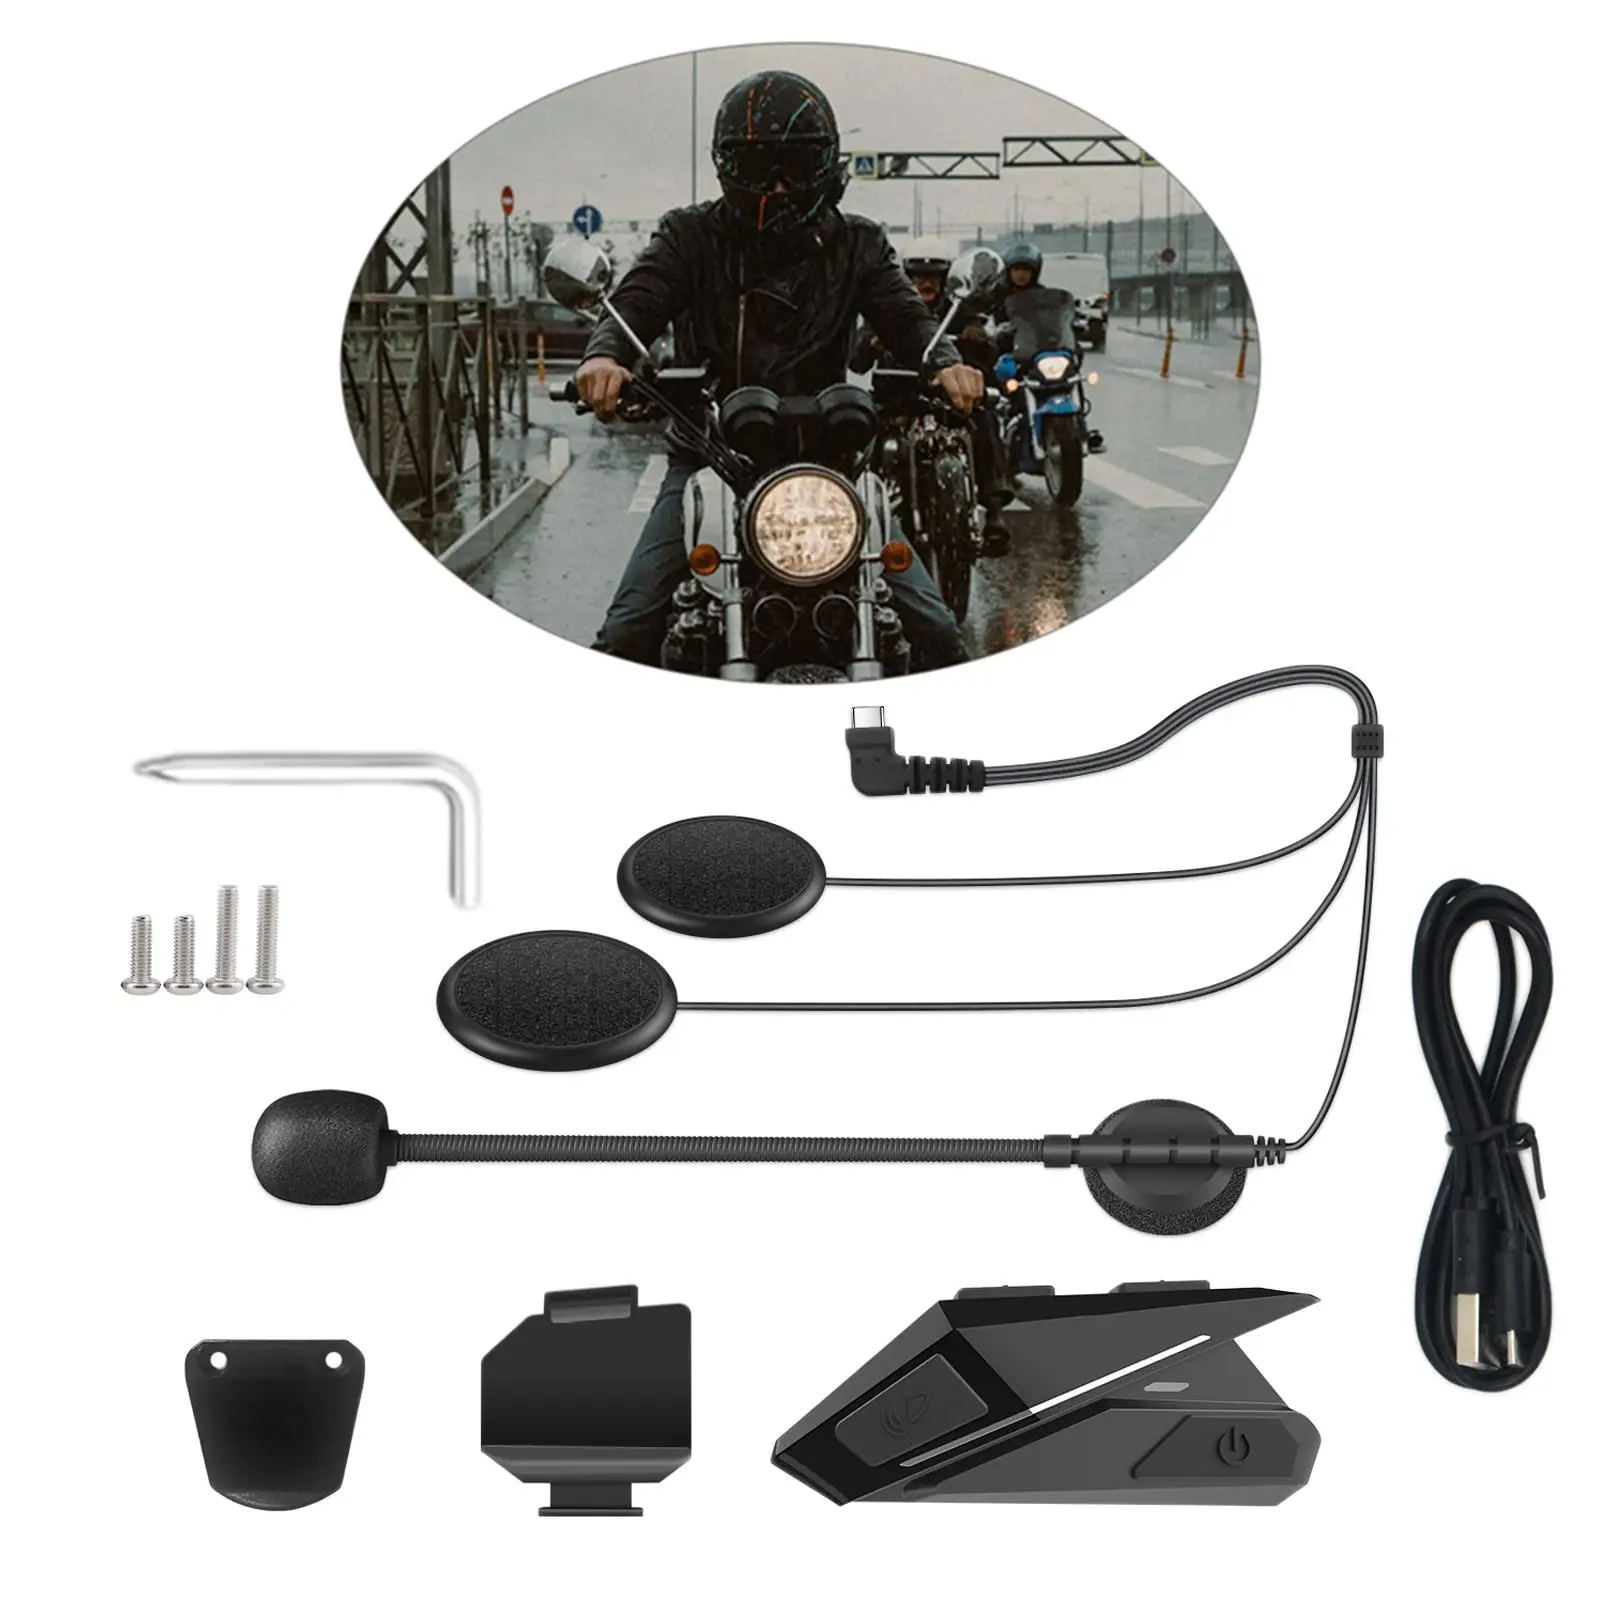 Motorcycle Bluetooth 5.0 Headset Connect to Intercom High Sound for Outdoor Sports